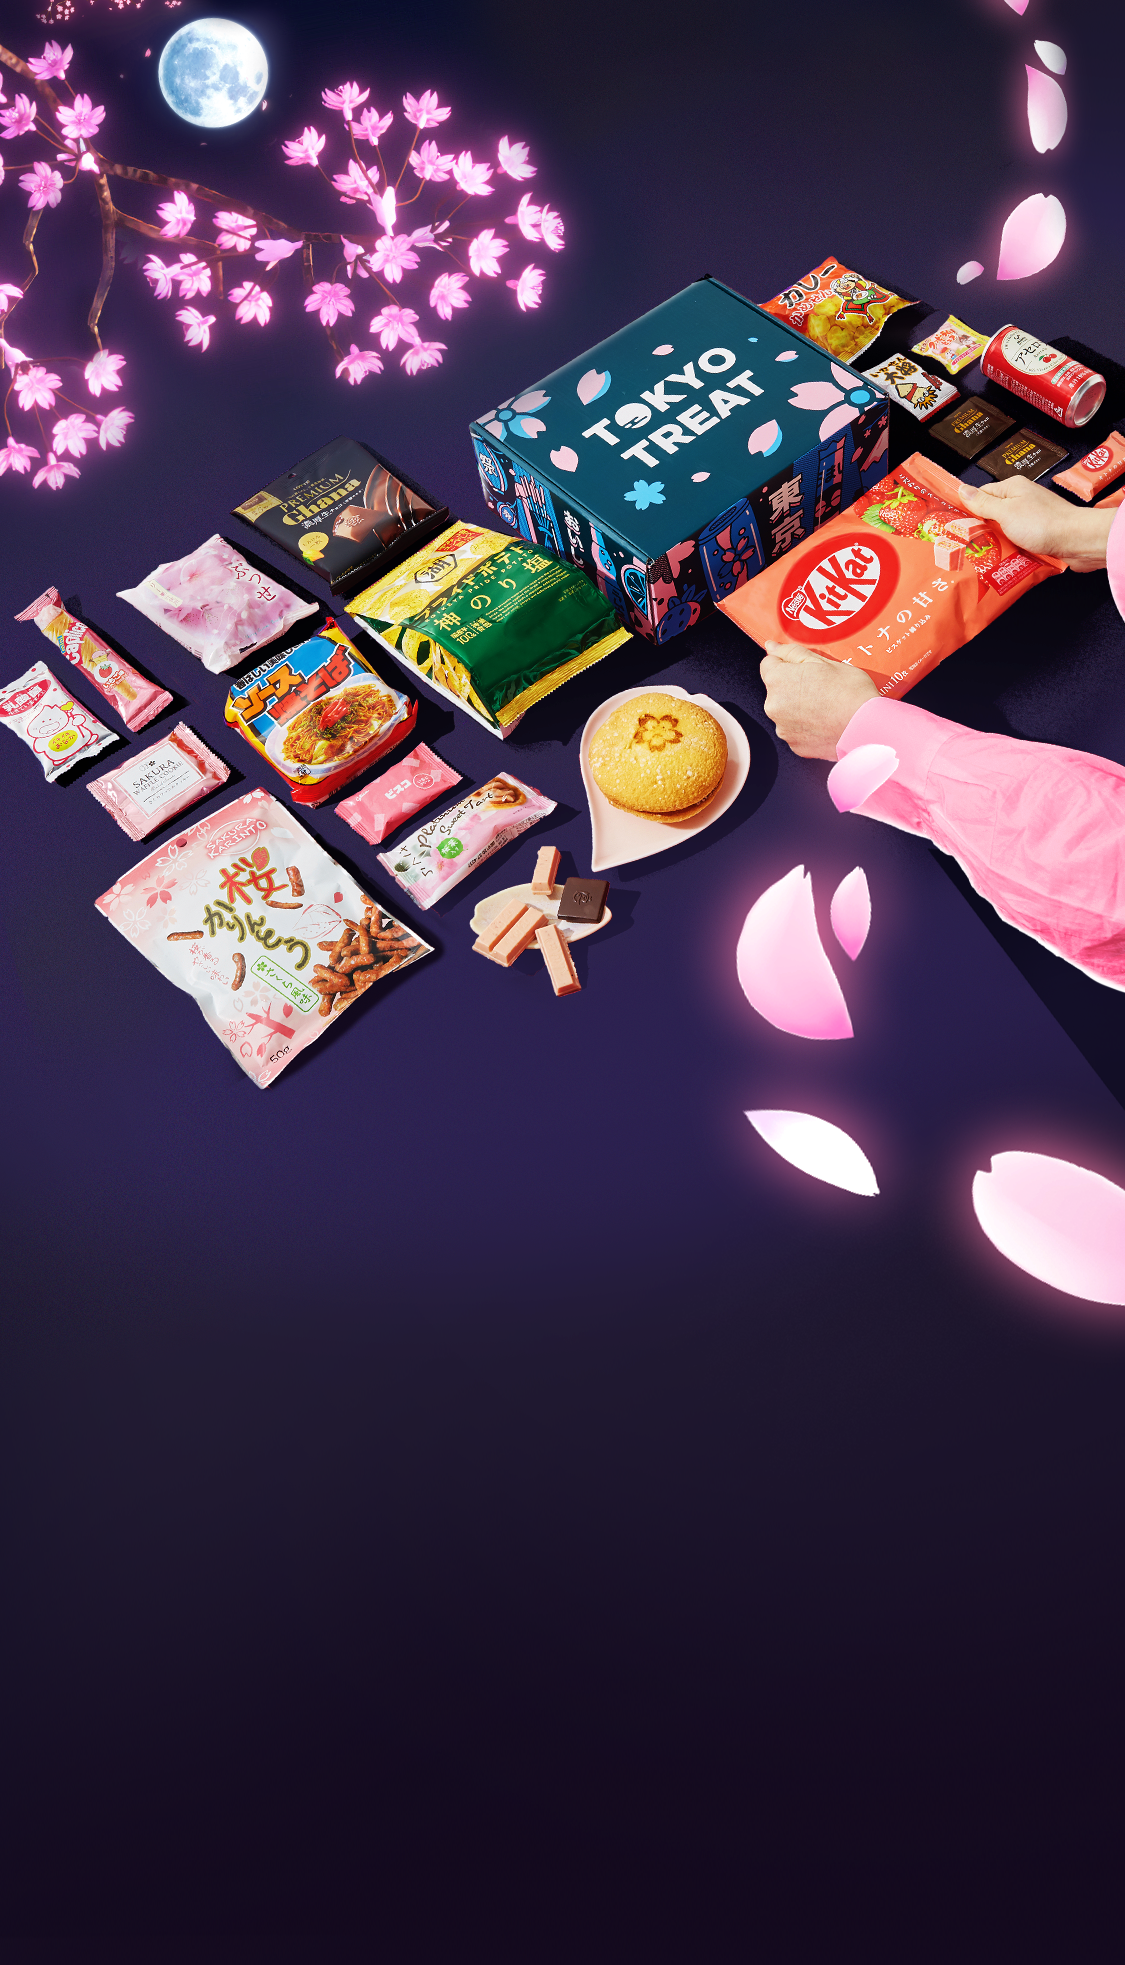 TokyoTreat box sits against a dark purple background, surrounded by cherry blossoms and box items.